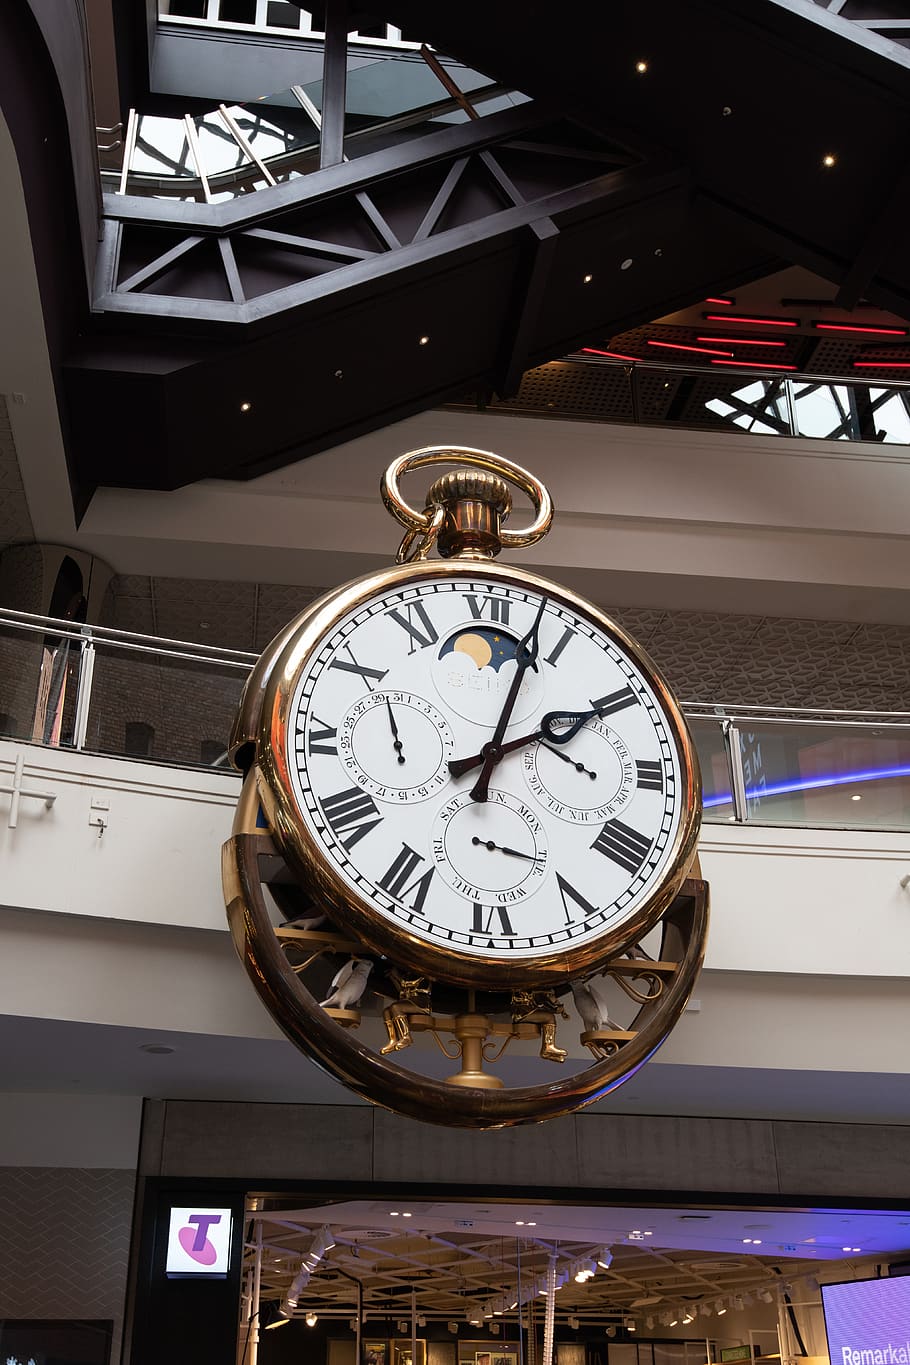 clock, melbourne, melbourne central, time, cbd, giant, iconic, touristy, fob watch clock, time piece